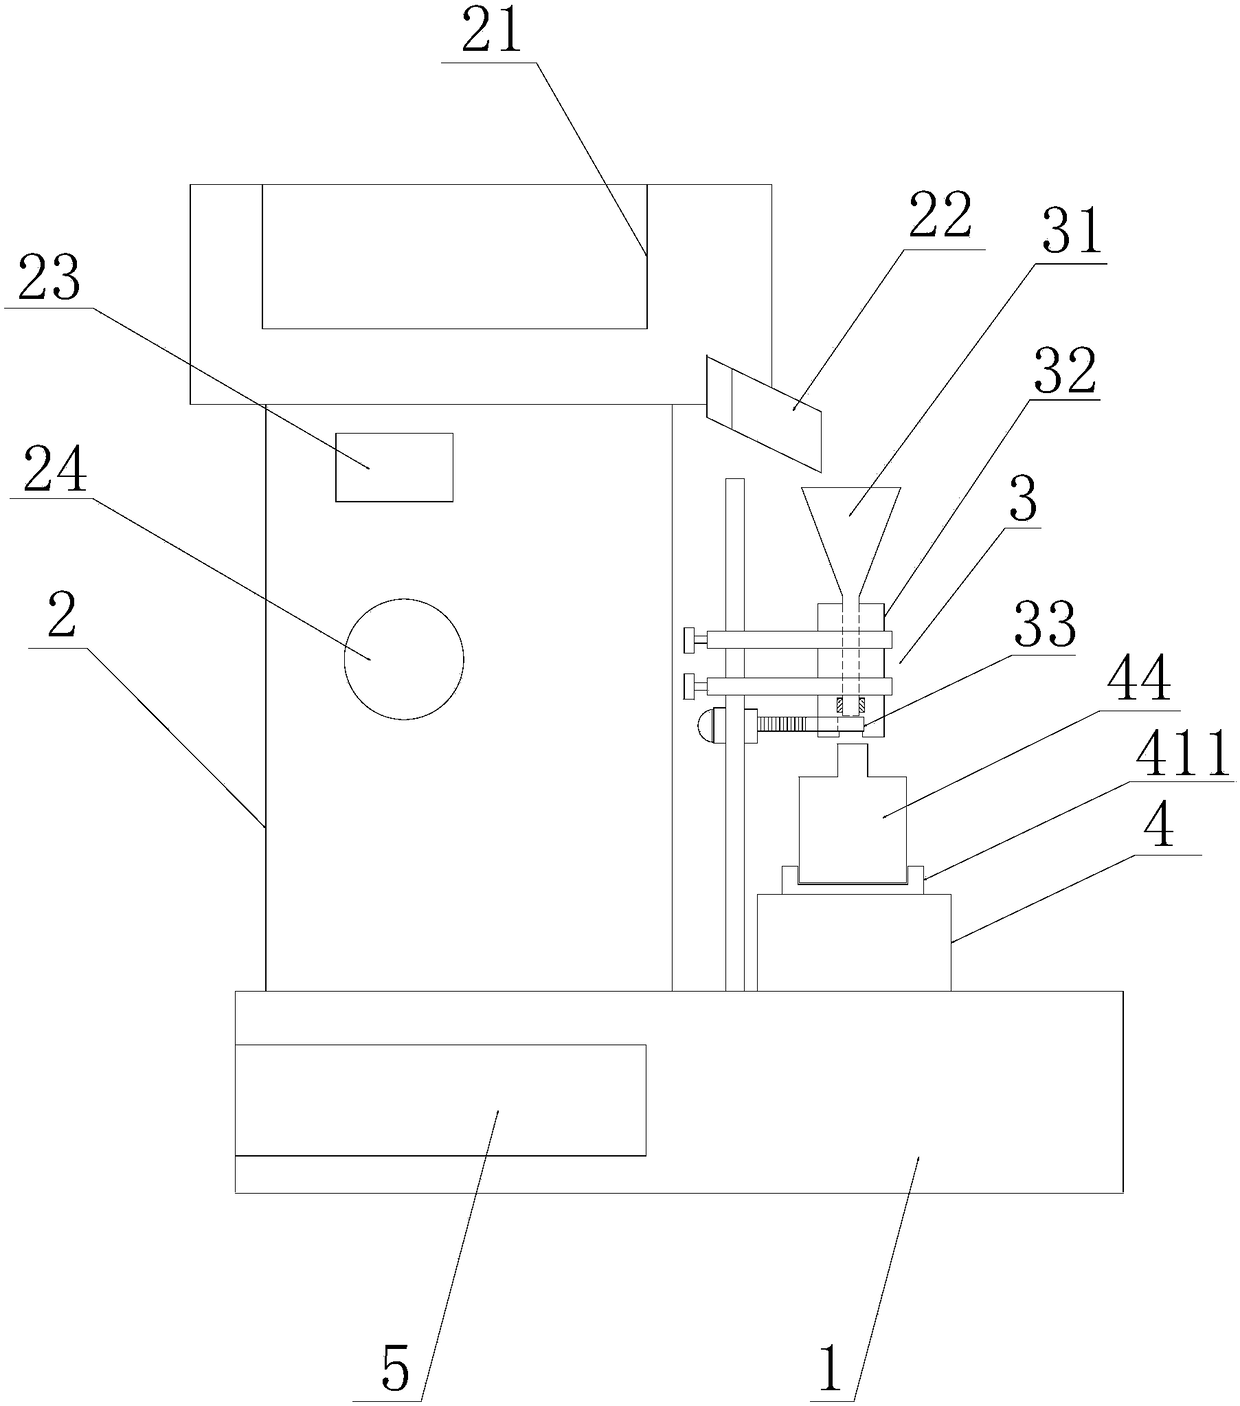 Capsule dust removing and bottling device